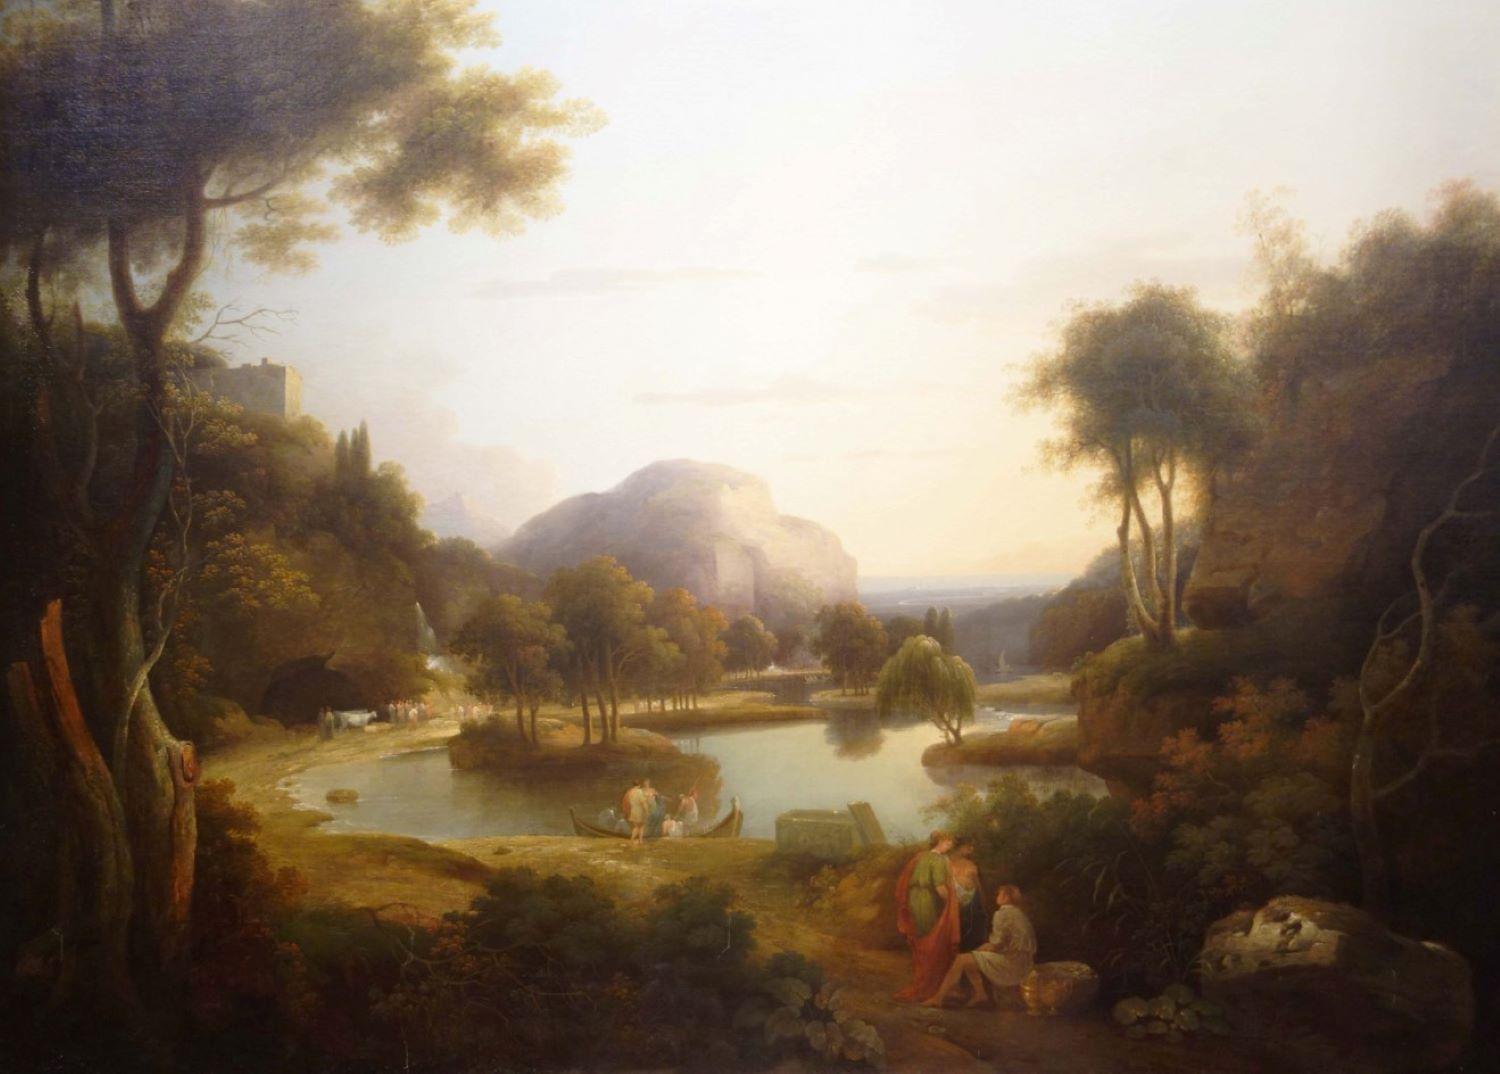 Samuel James Ainsley Landscape Painting - A Gathering by a Lake in the Roman Campagna